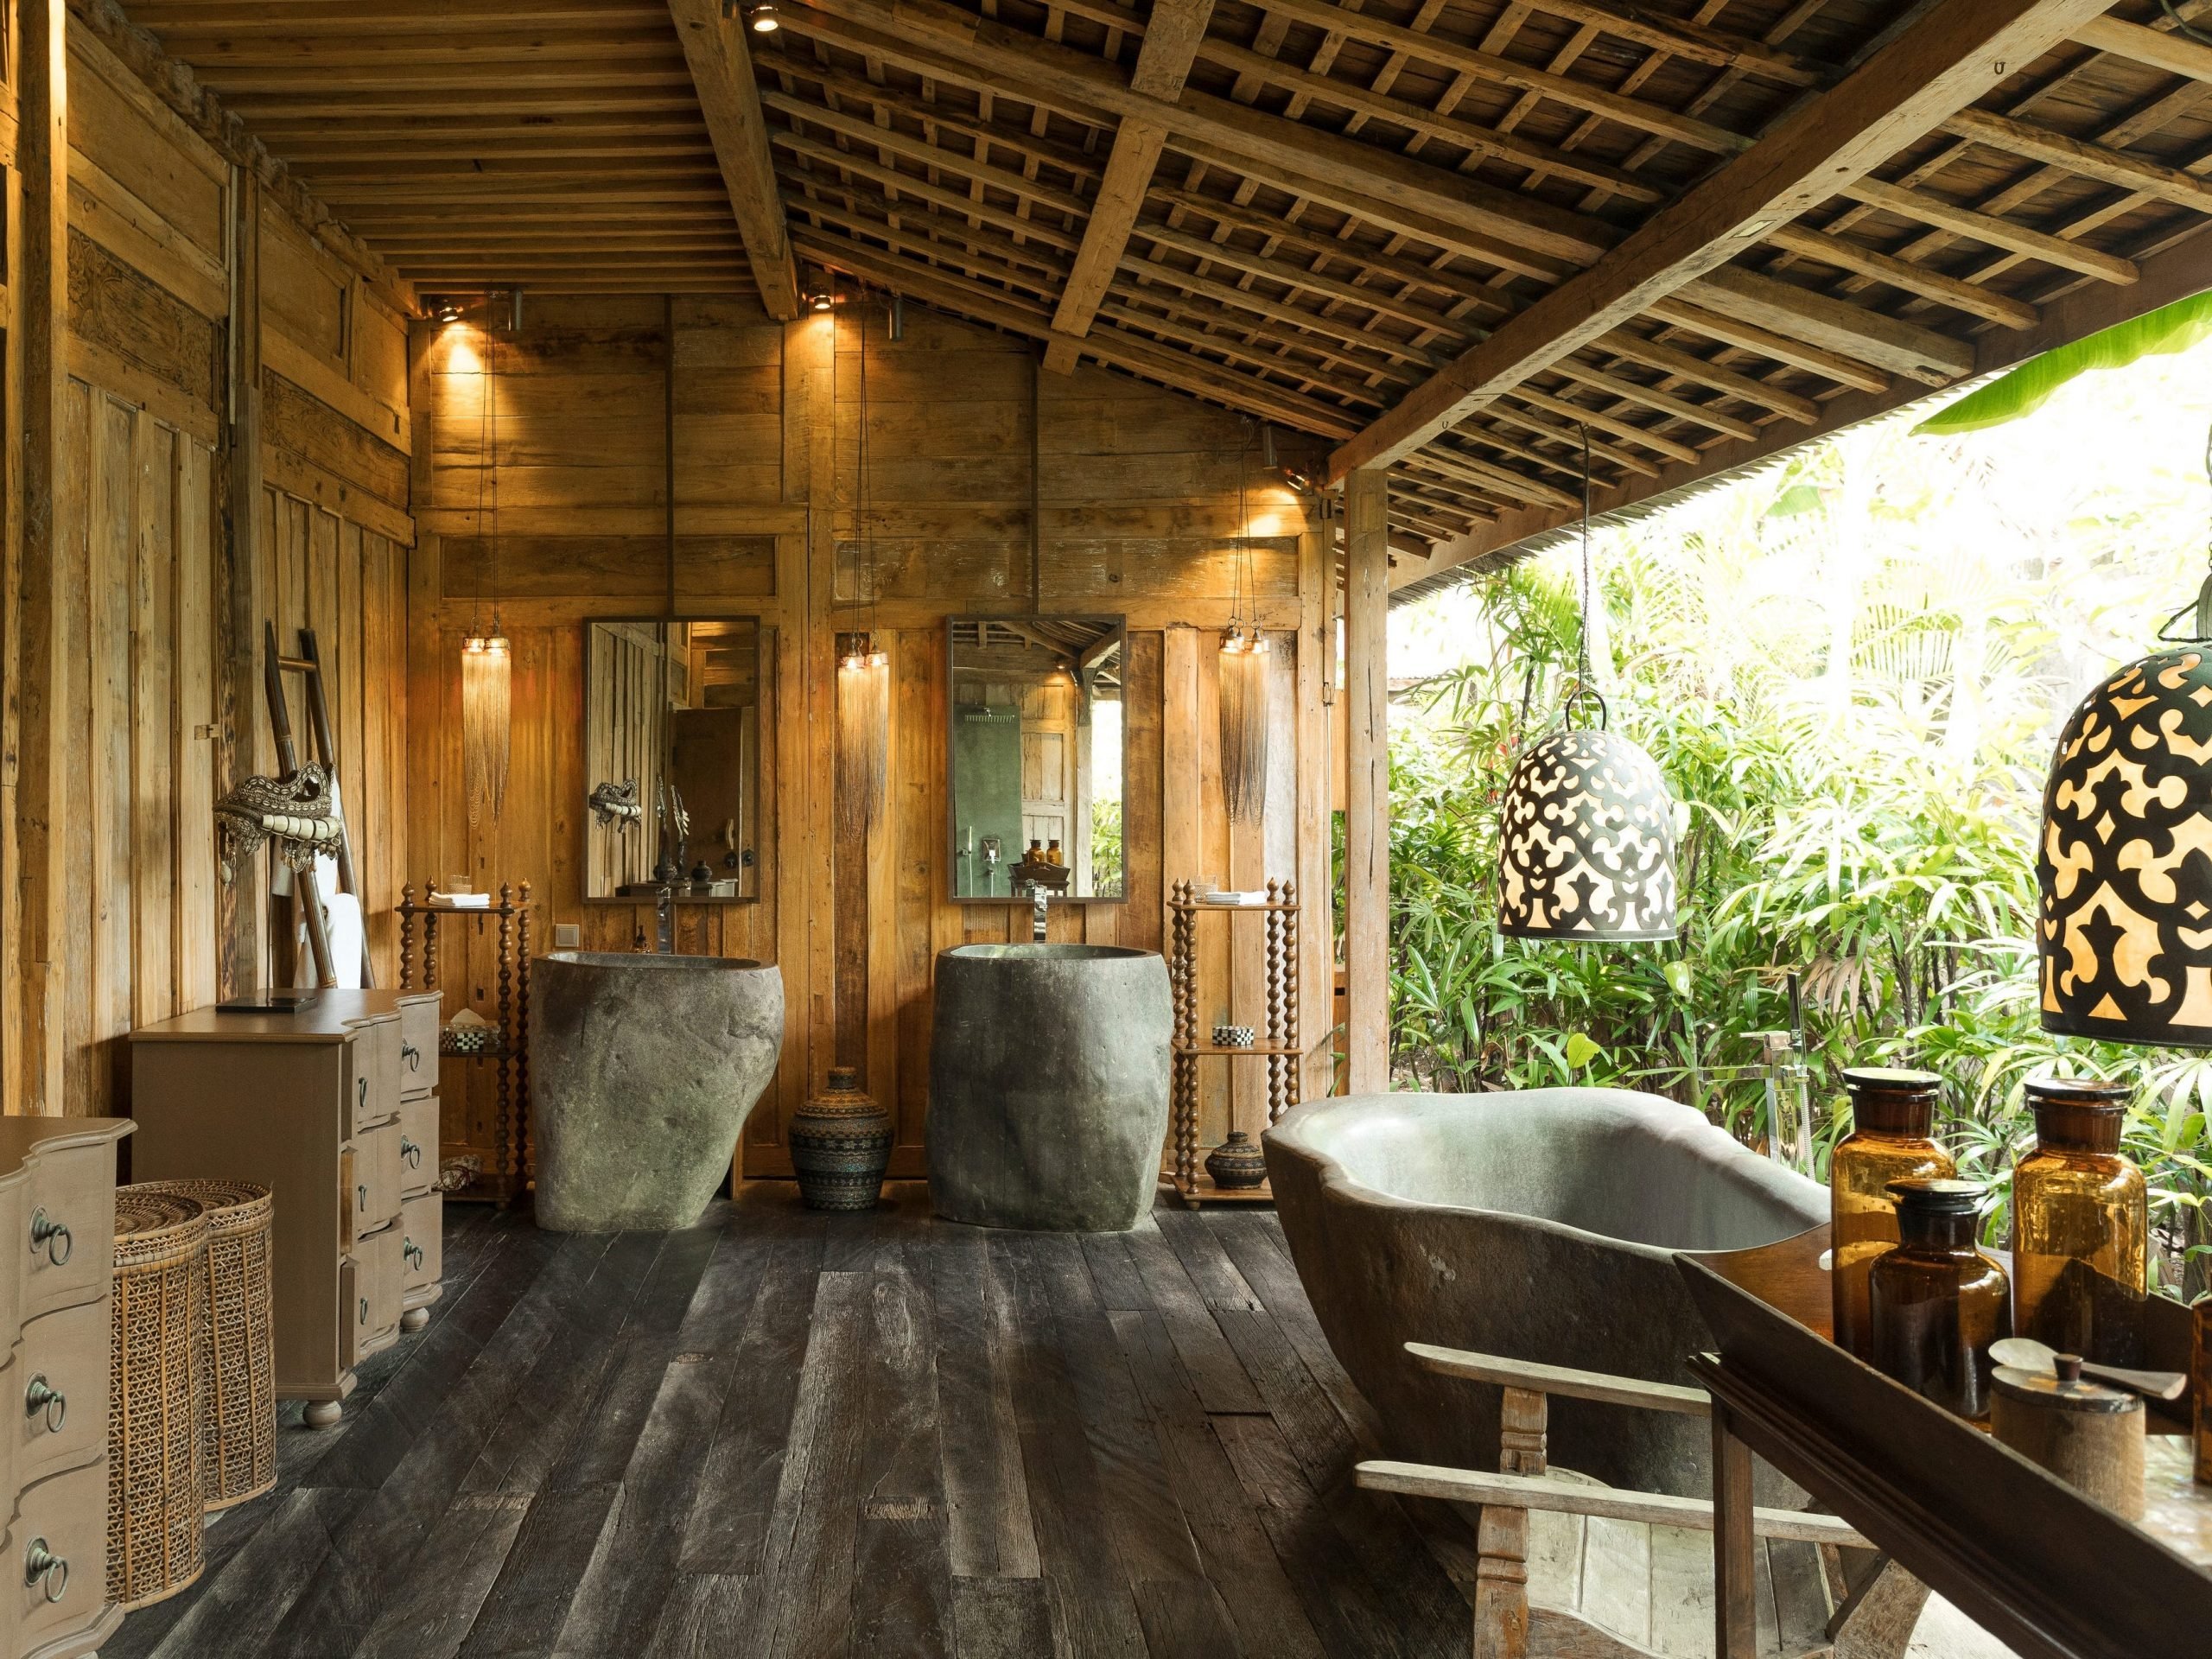 the bathrooms open up to the outdoors and include free standing tubs and natural wood accents